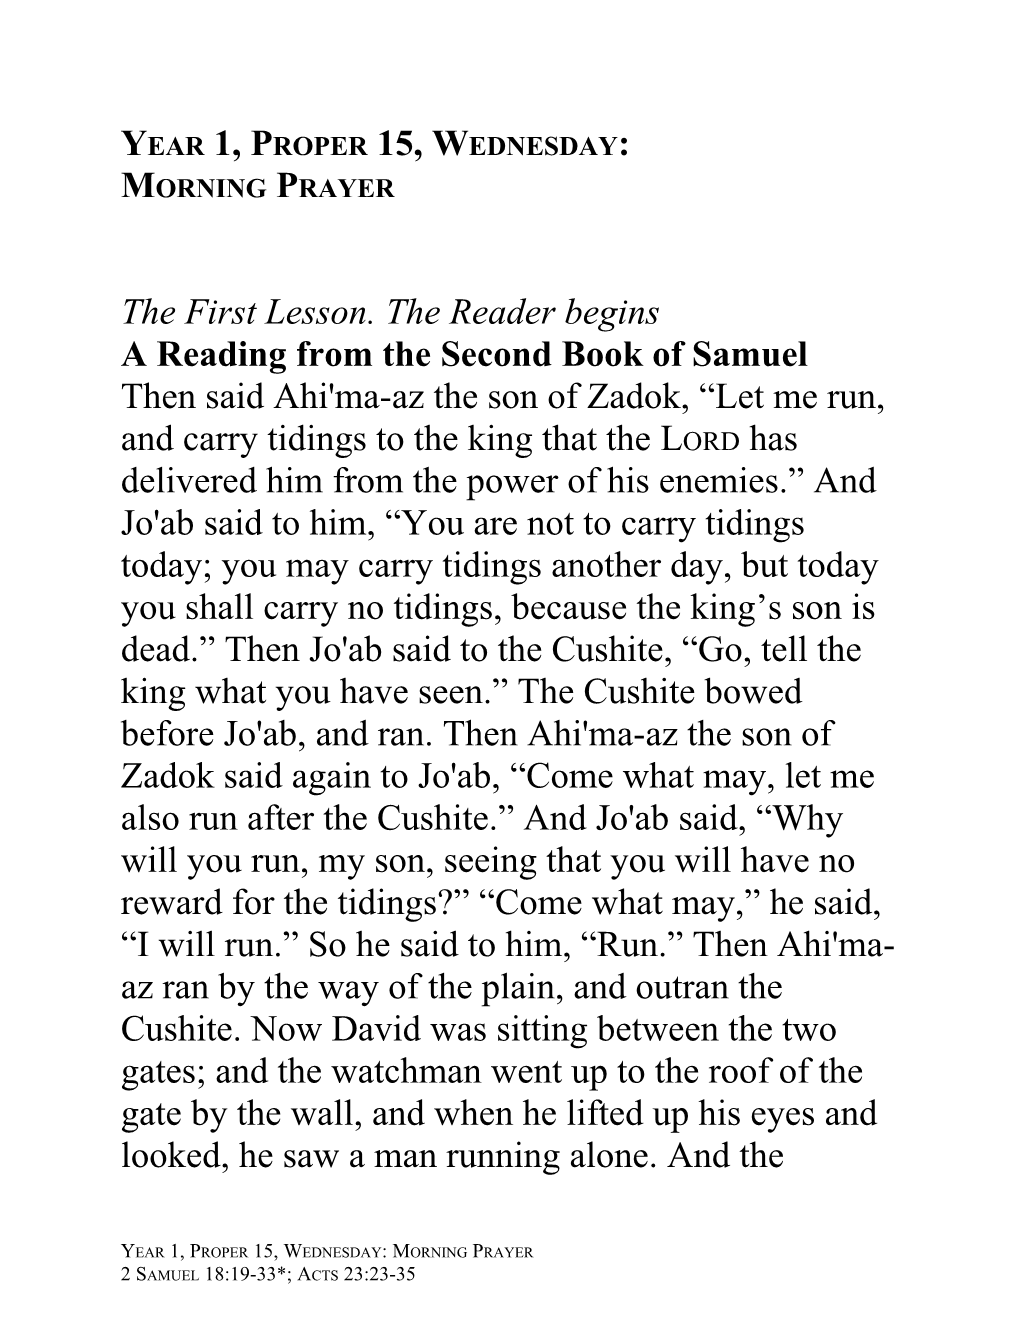 A Reading from the Second Book of Samuel